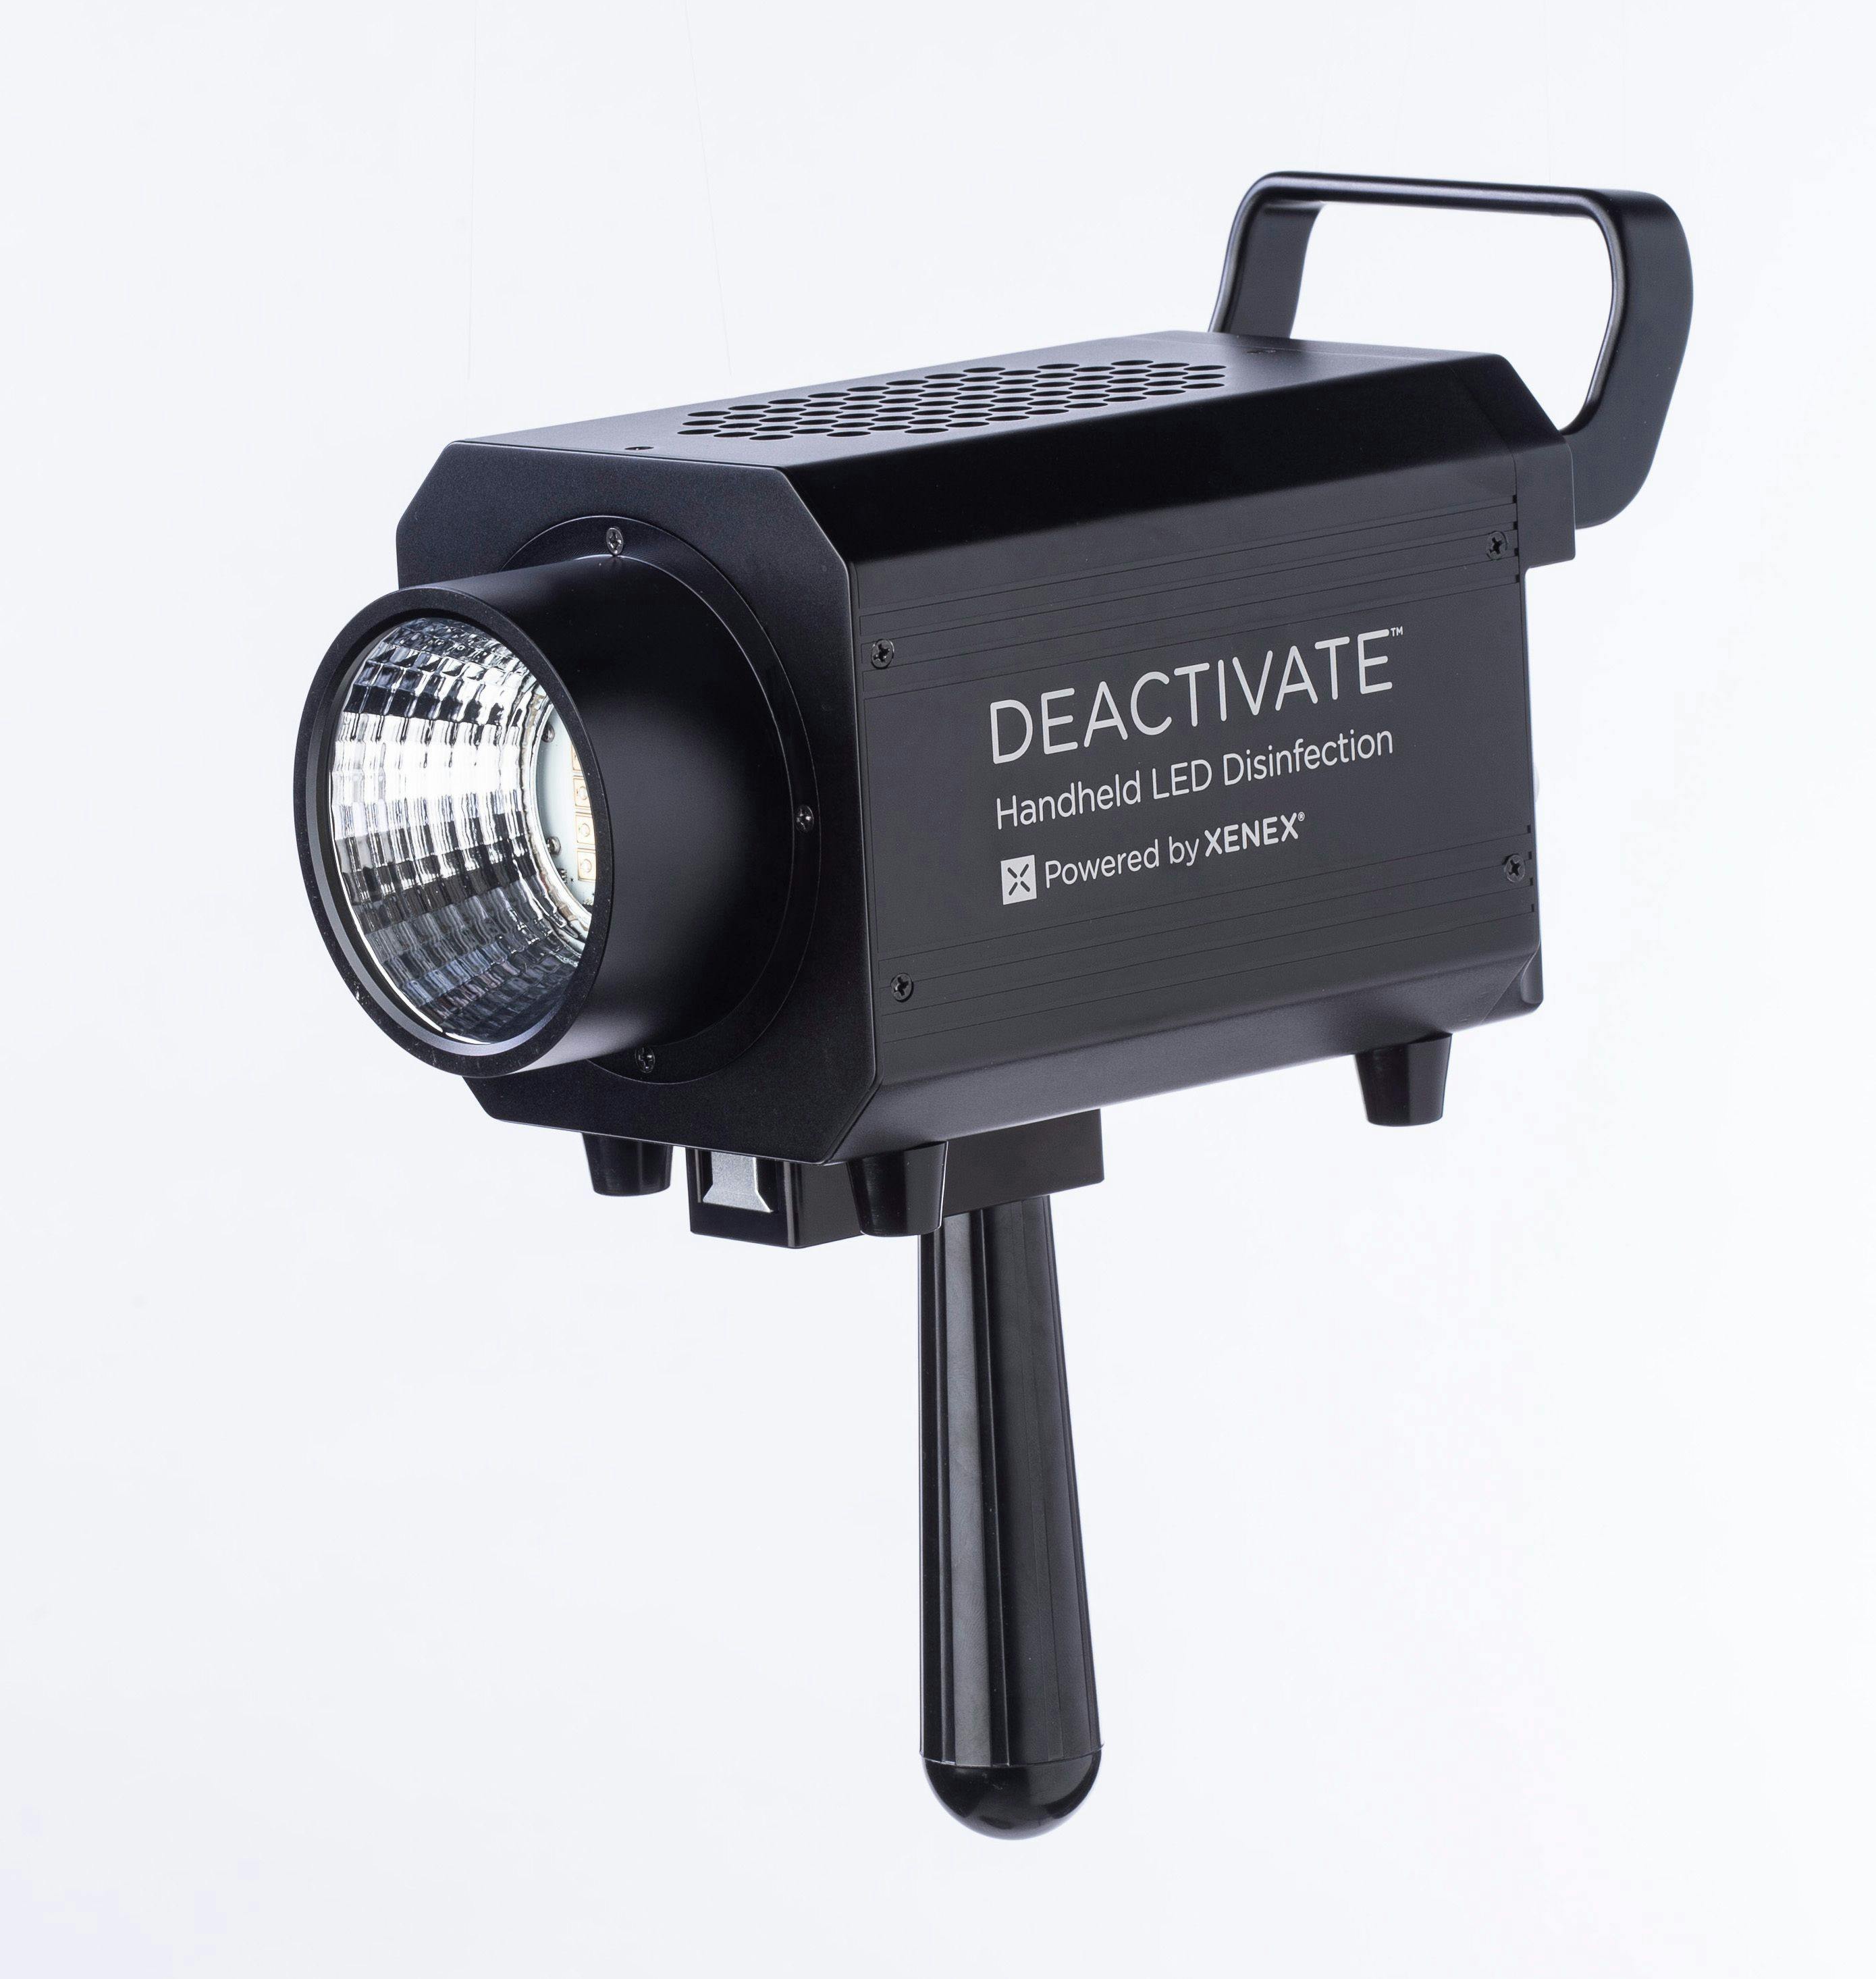 Deactivate™ is a high-powered, handheld LED device designed to quickly disinfect surfaces in confined spaces.